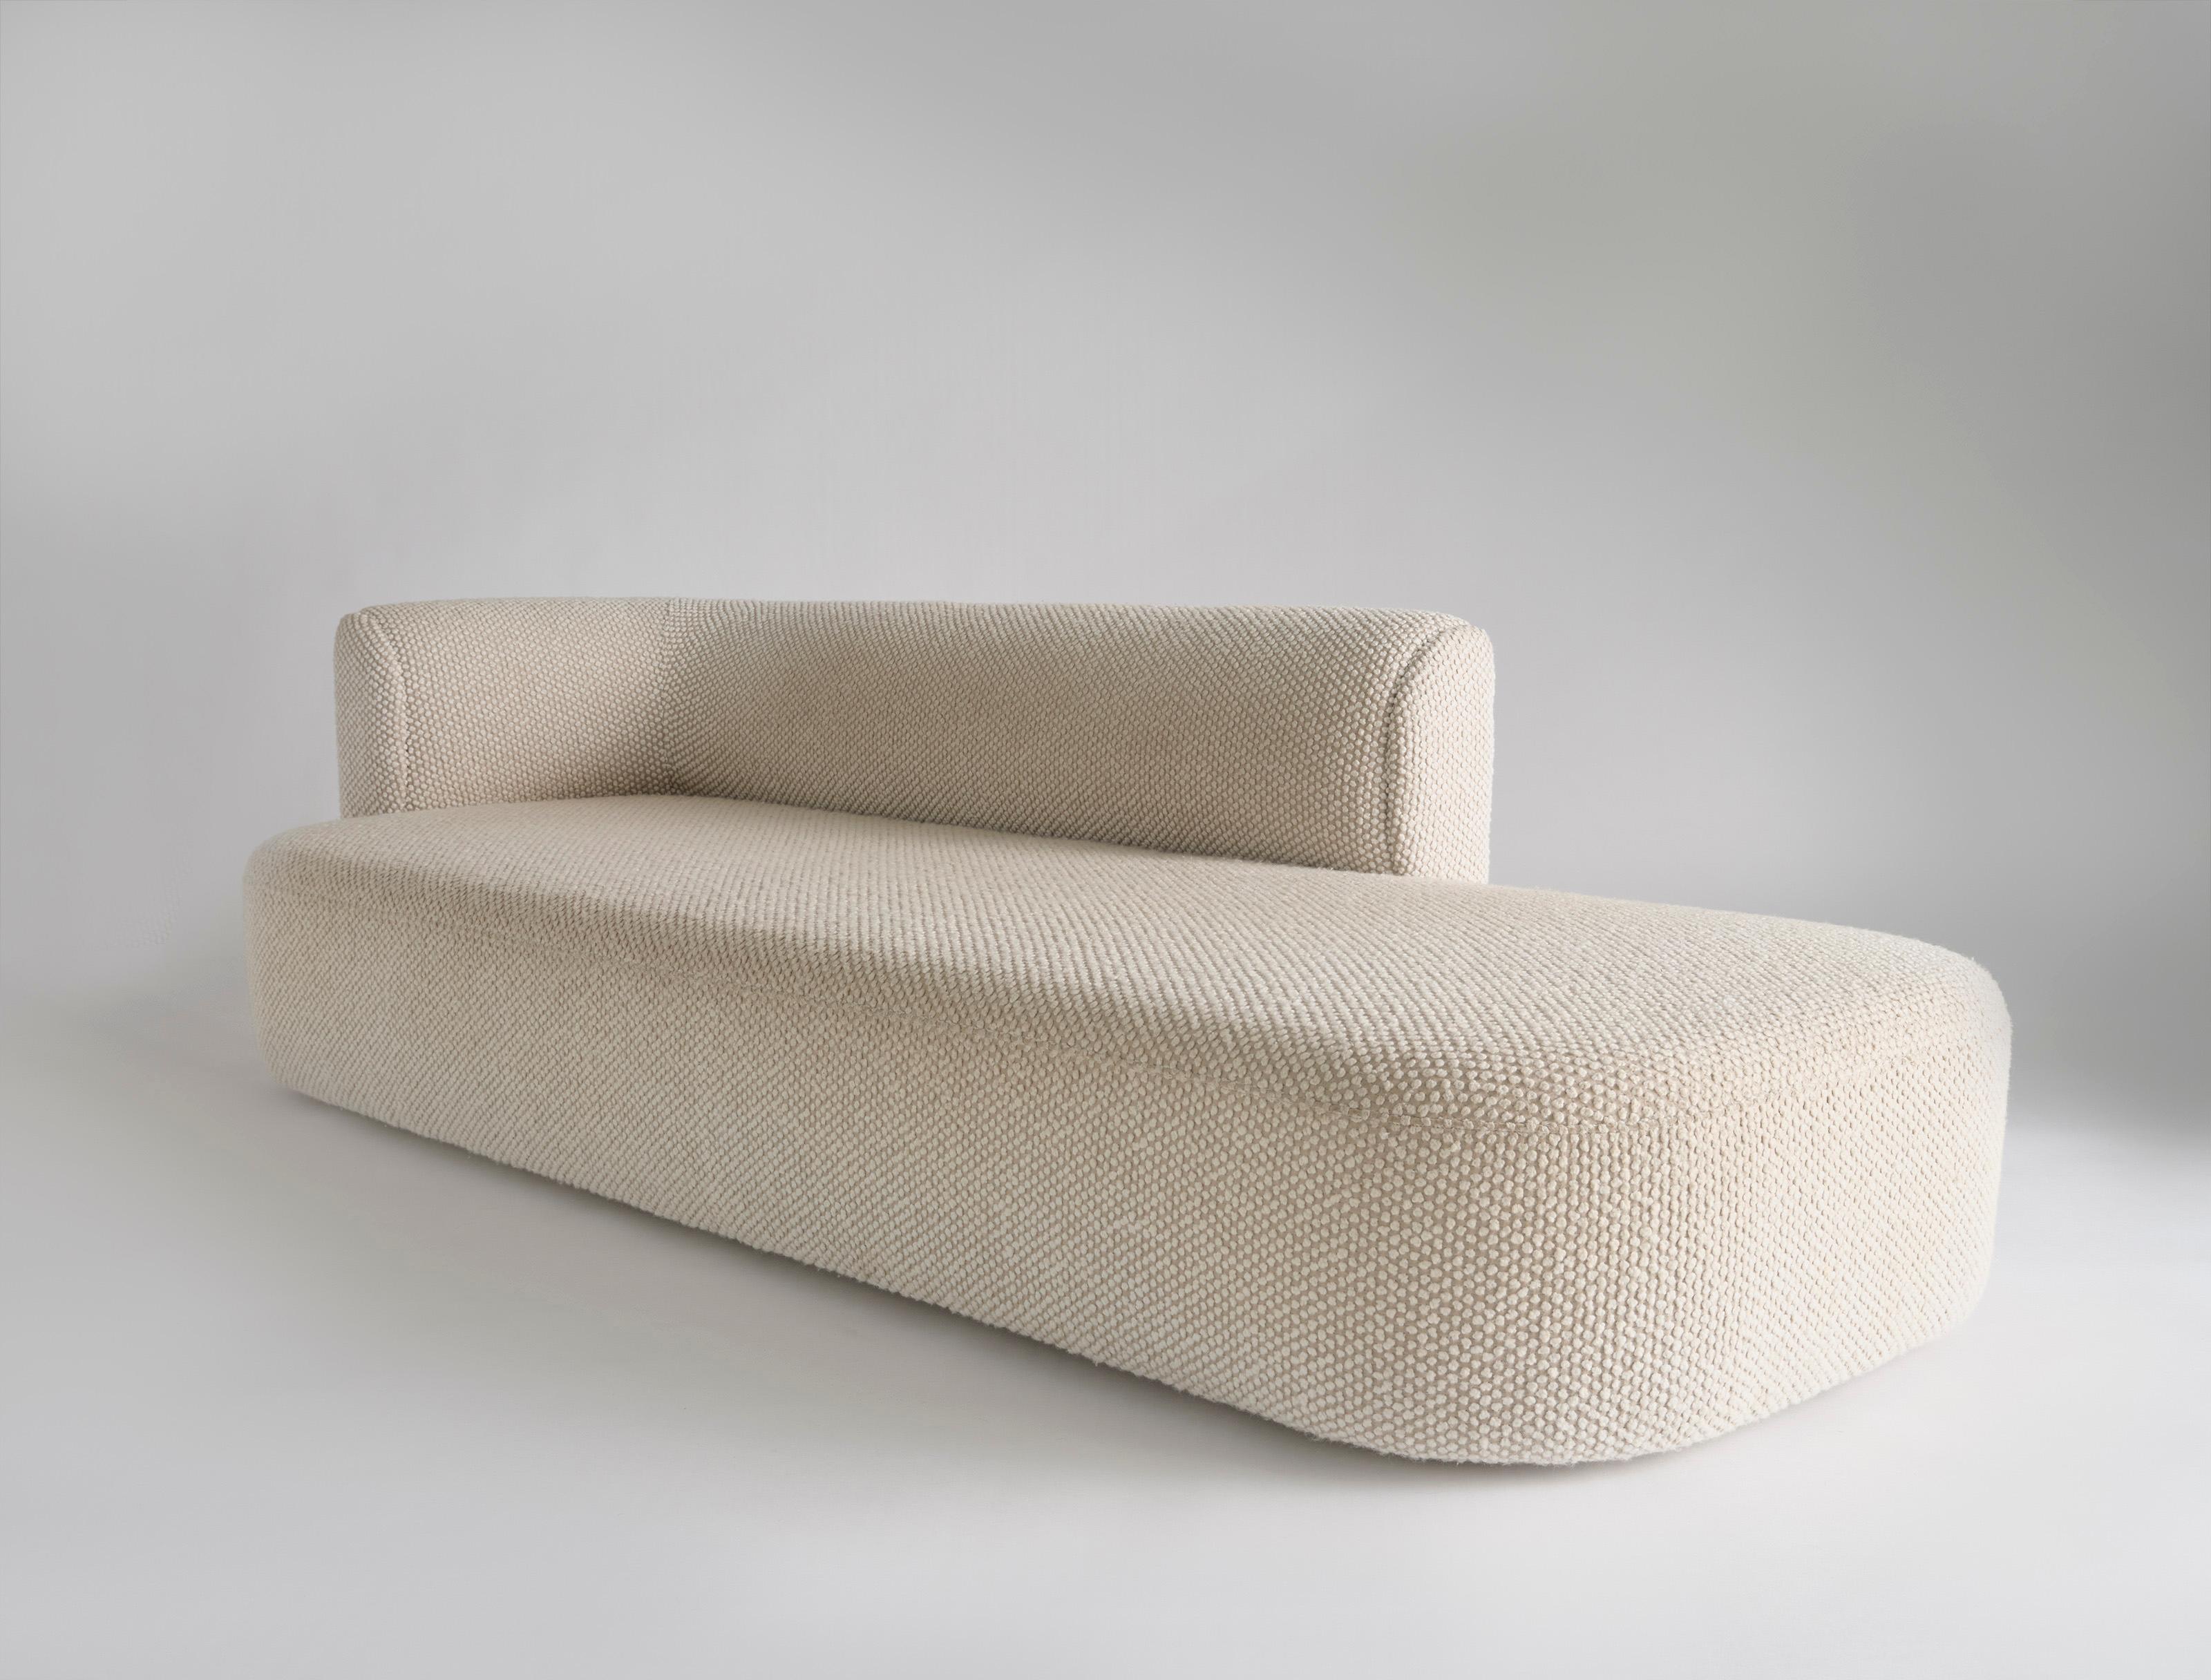 Modern Capper Large Chaise Longue by Phase Design